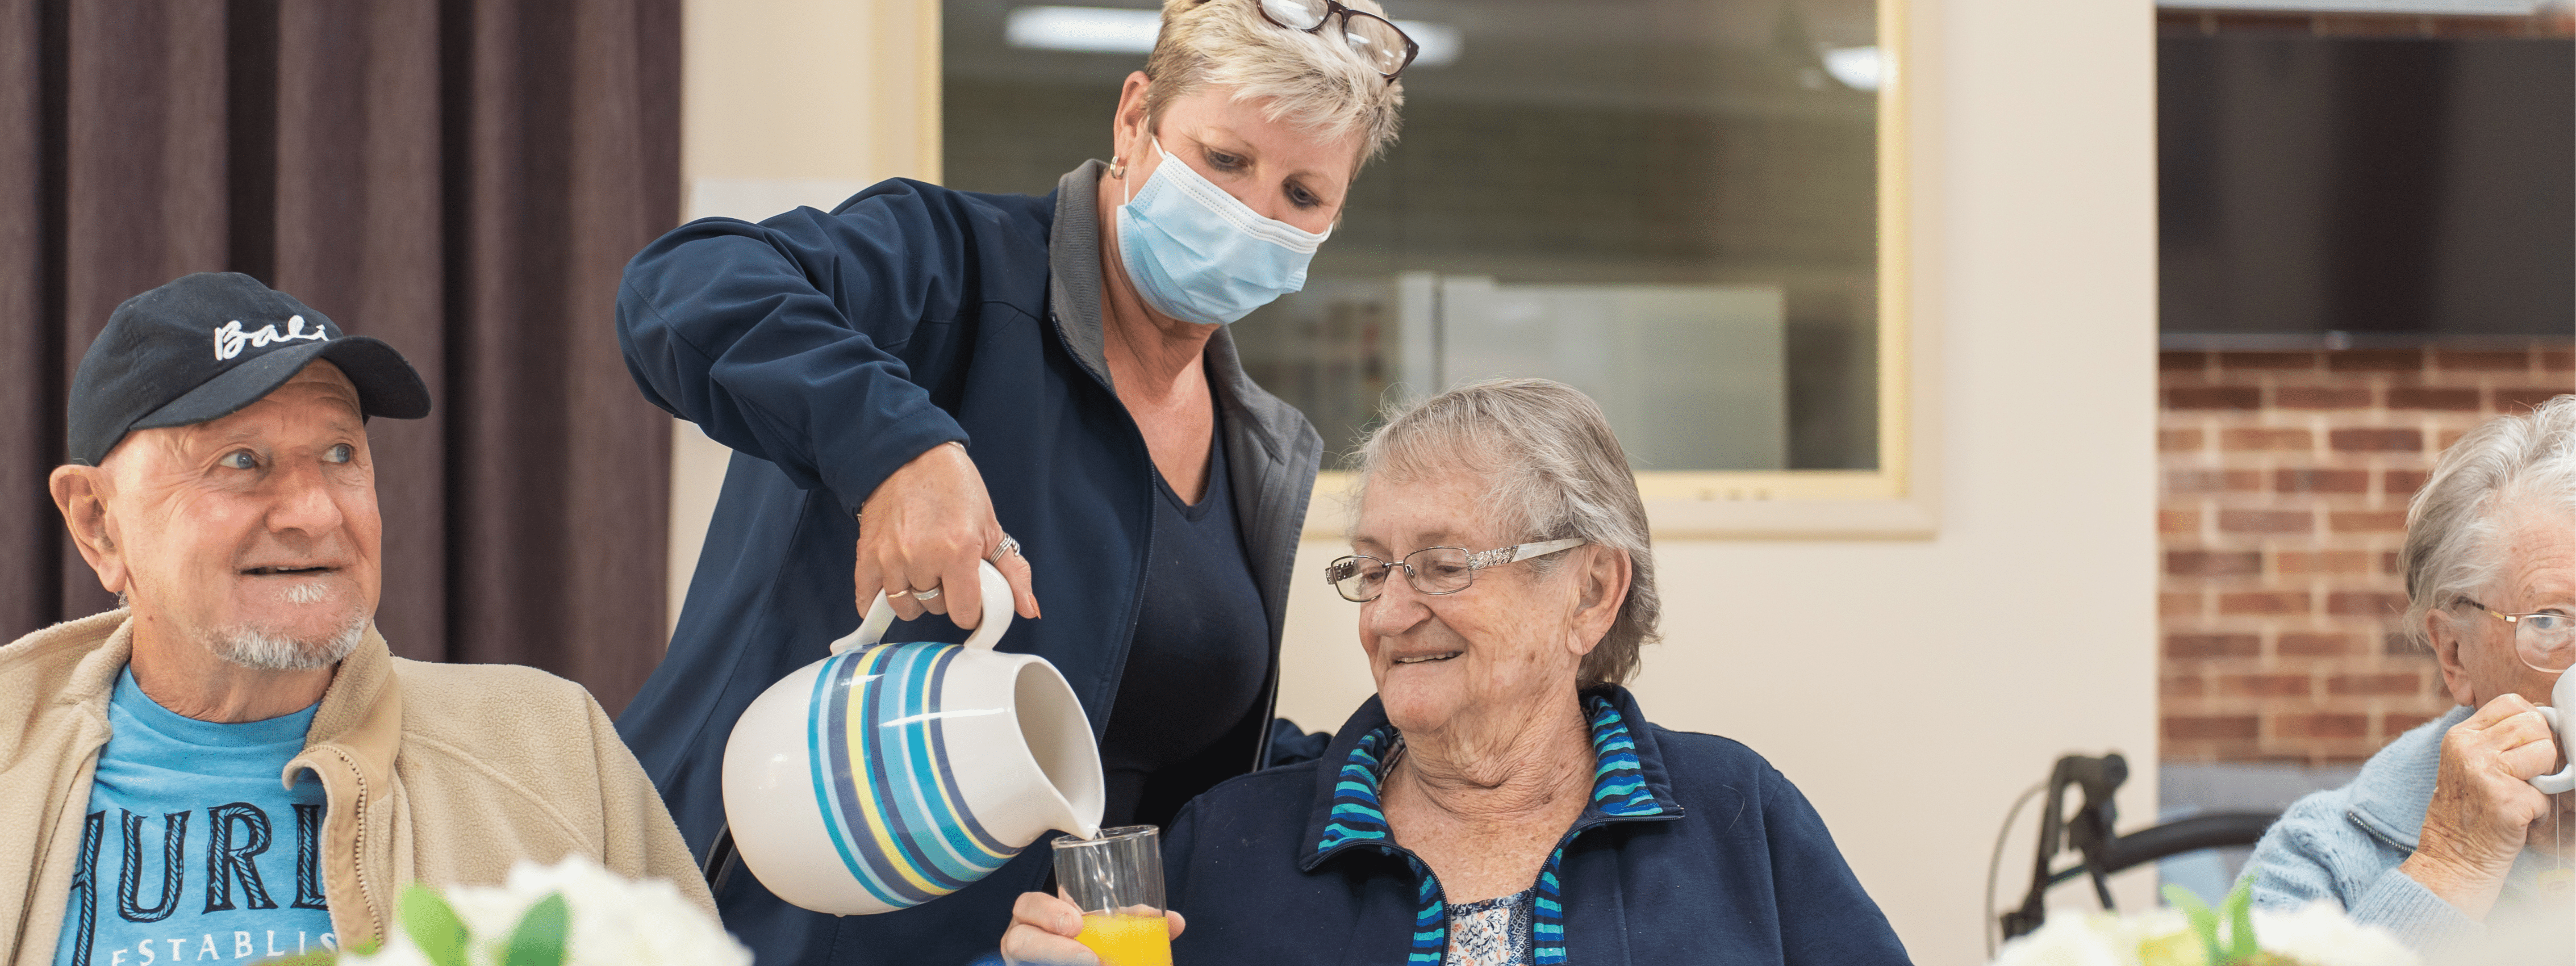 A Coastlink team member serves juice to an Aged Care client